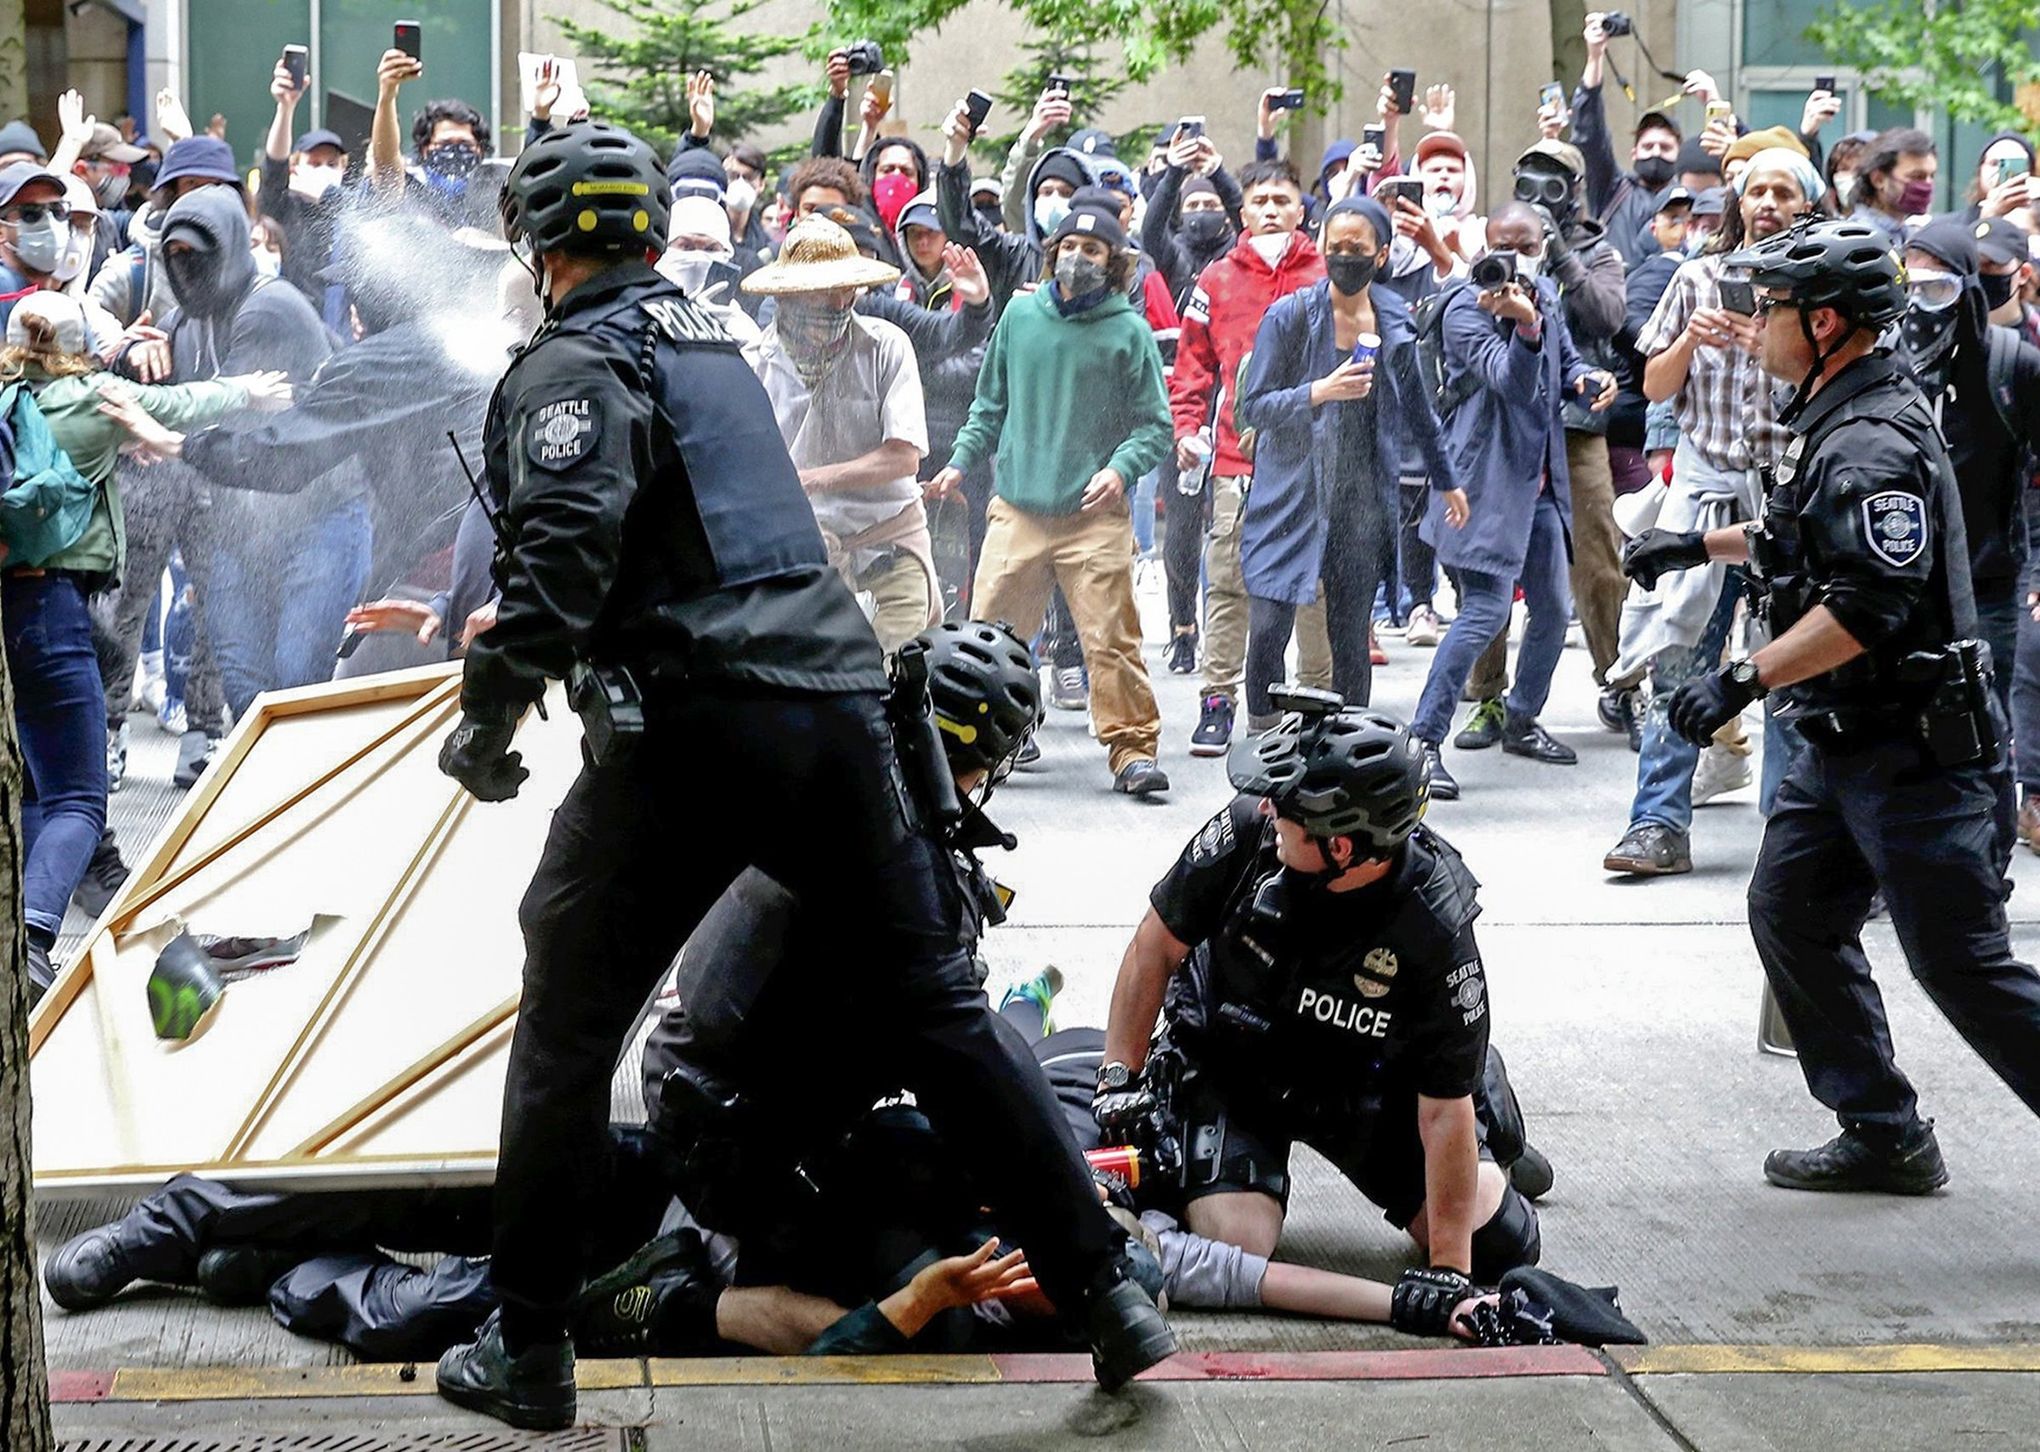 A Seattle police officer pepper-sprays protesters in downtown Seattle while another makes an arrest